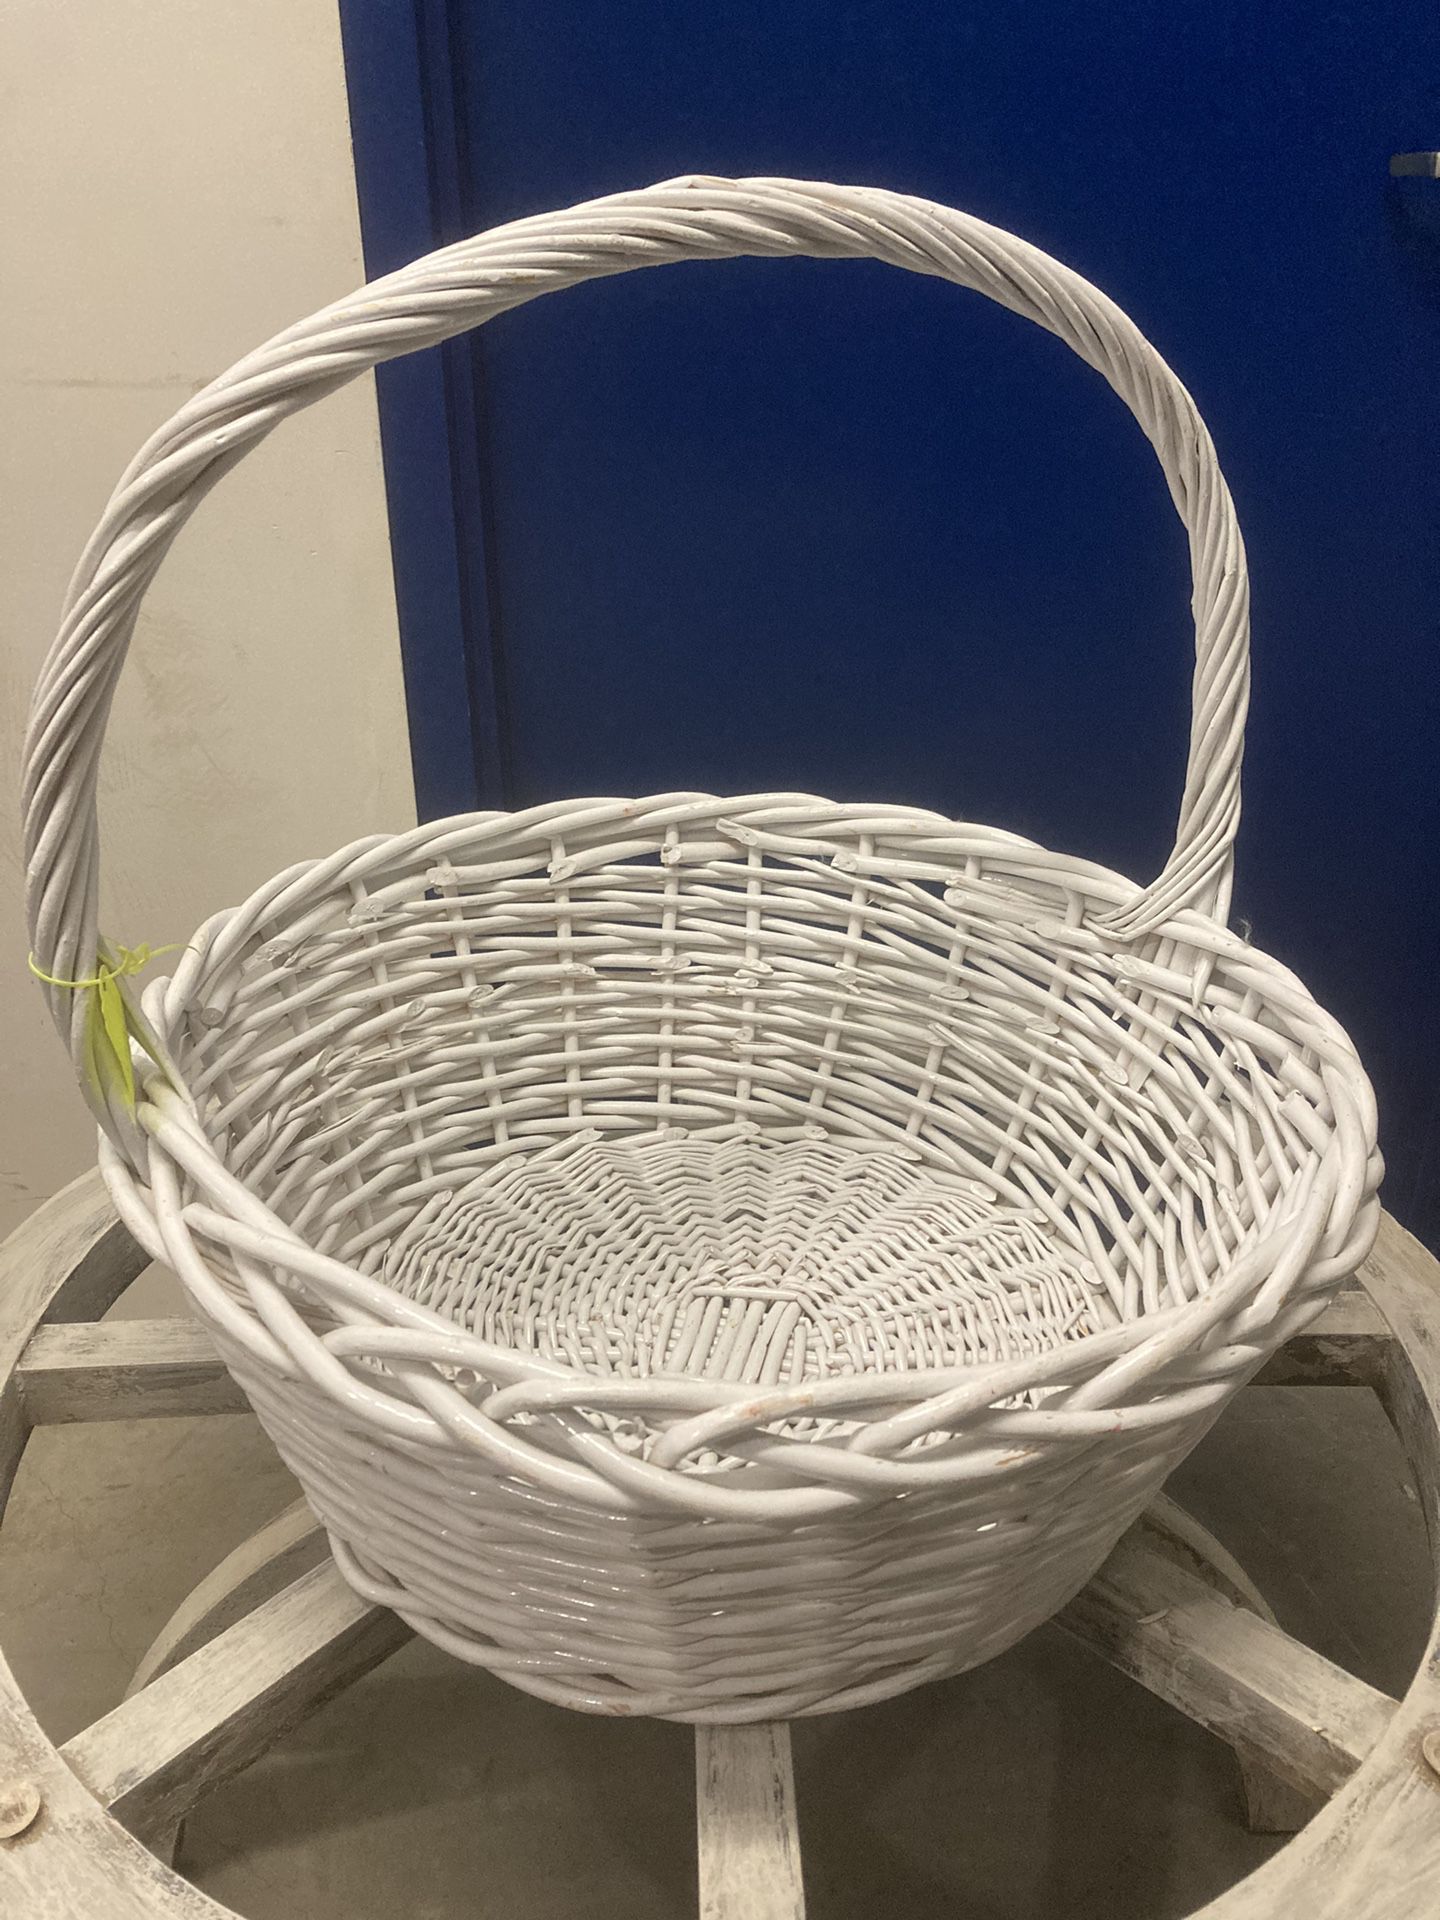 Easter basket, giant basket with handle, Wicker, white excellent condition GHENT/Norfolk $45!